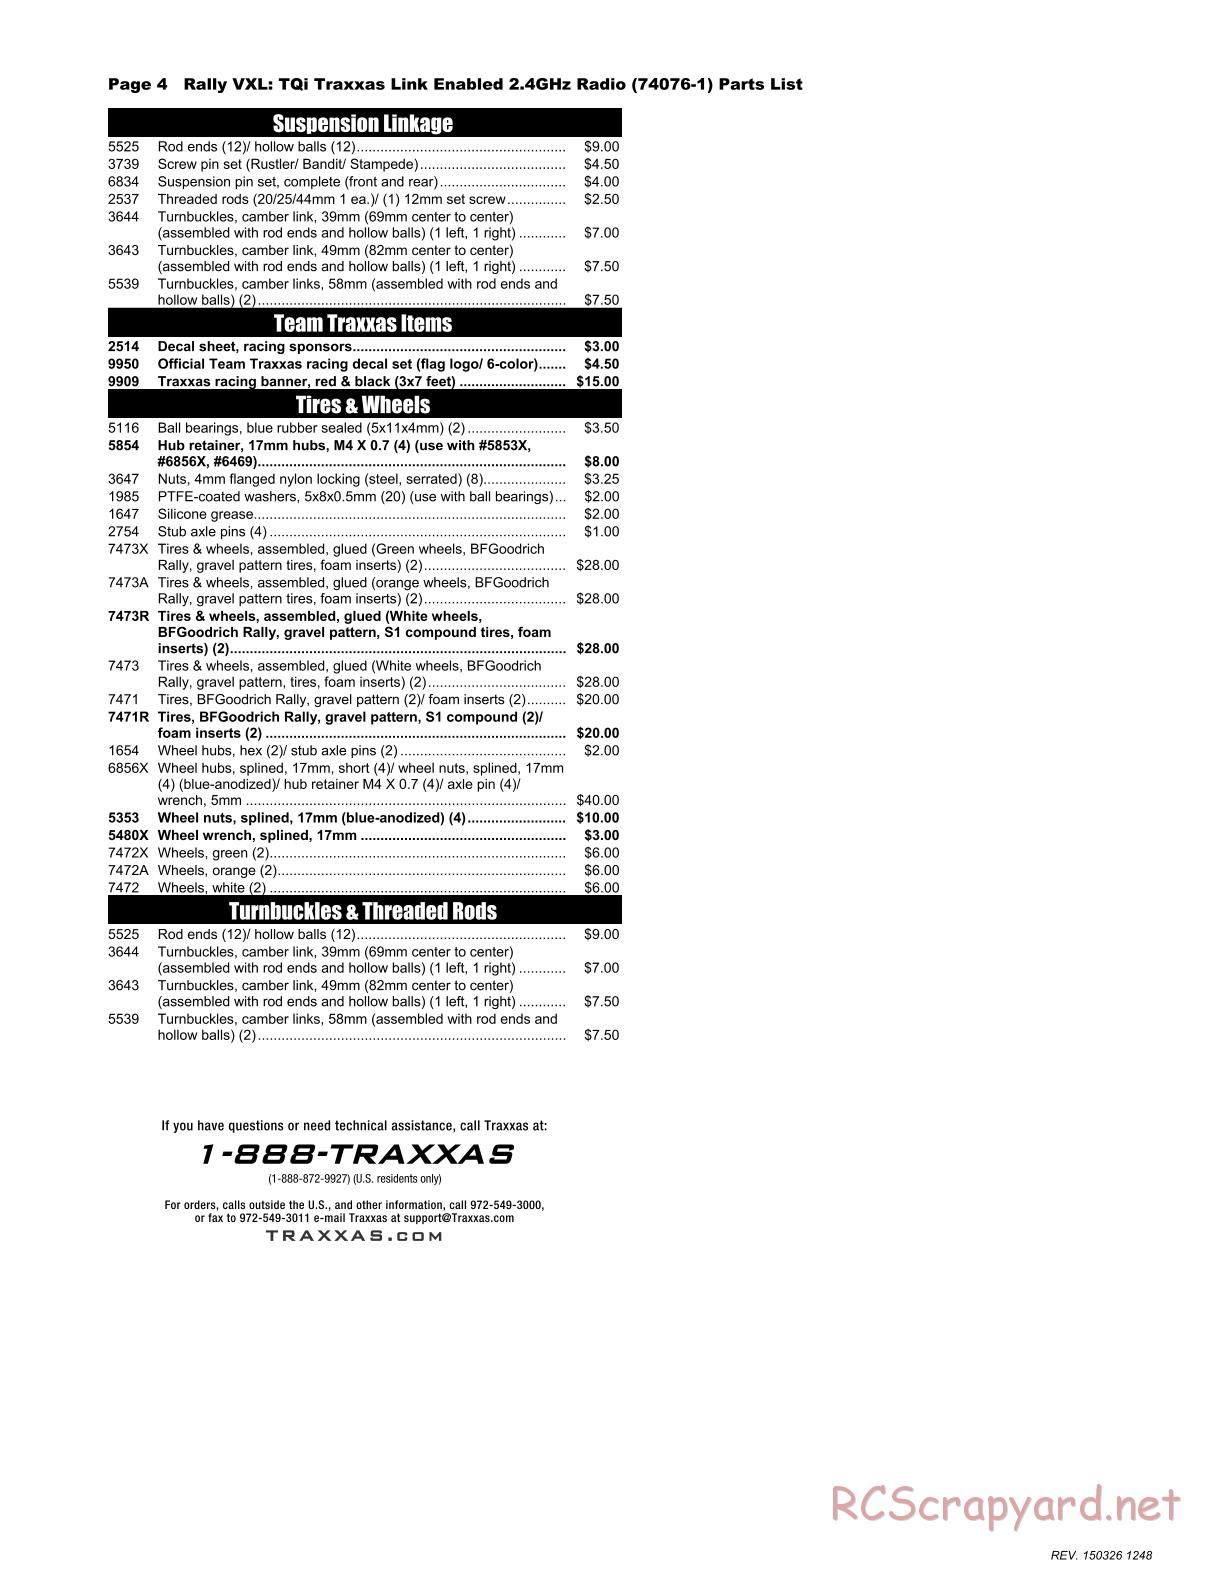 Traxxas - Rally (2015) - Parts List - Page 4